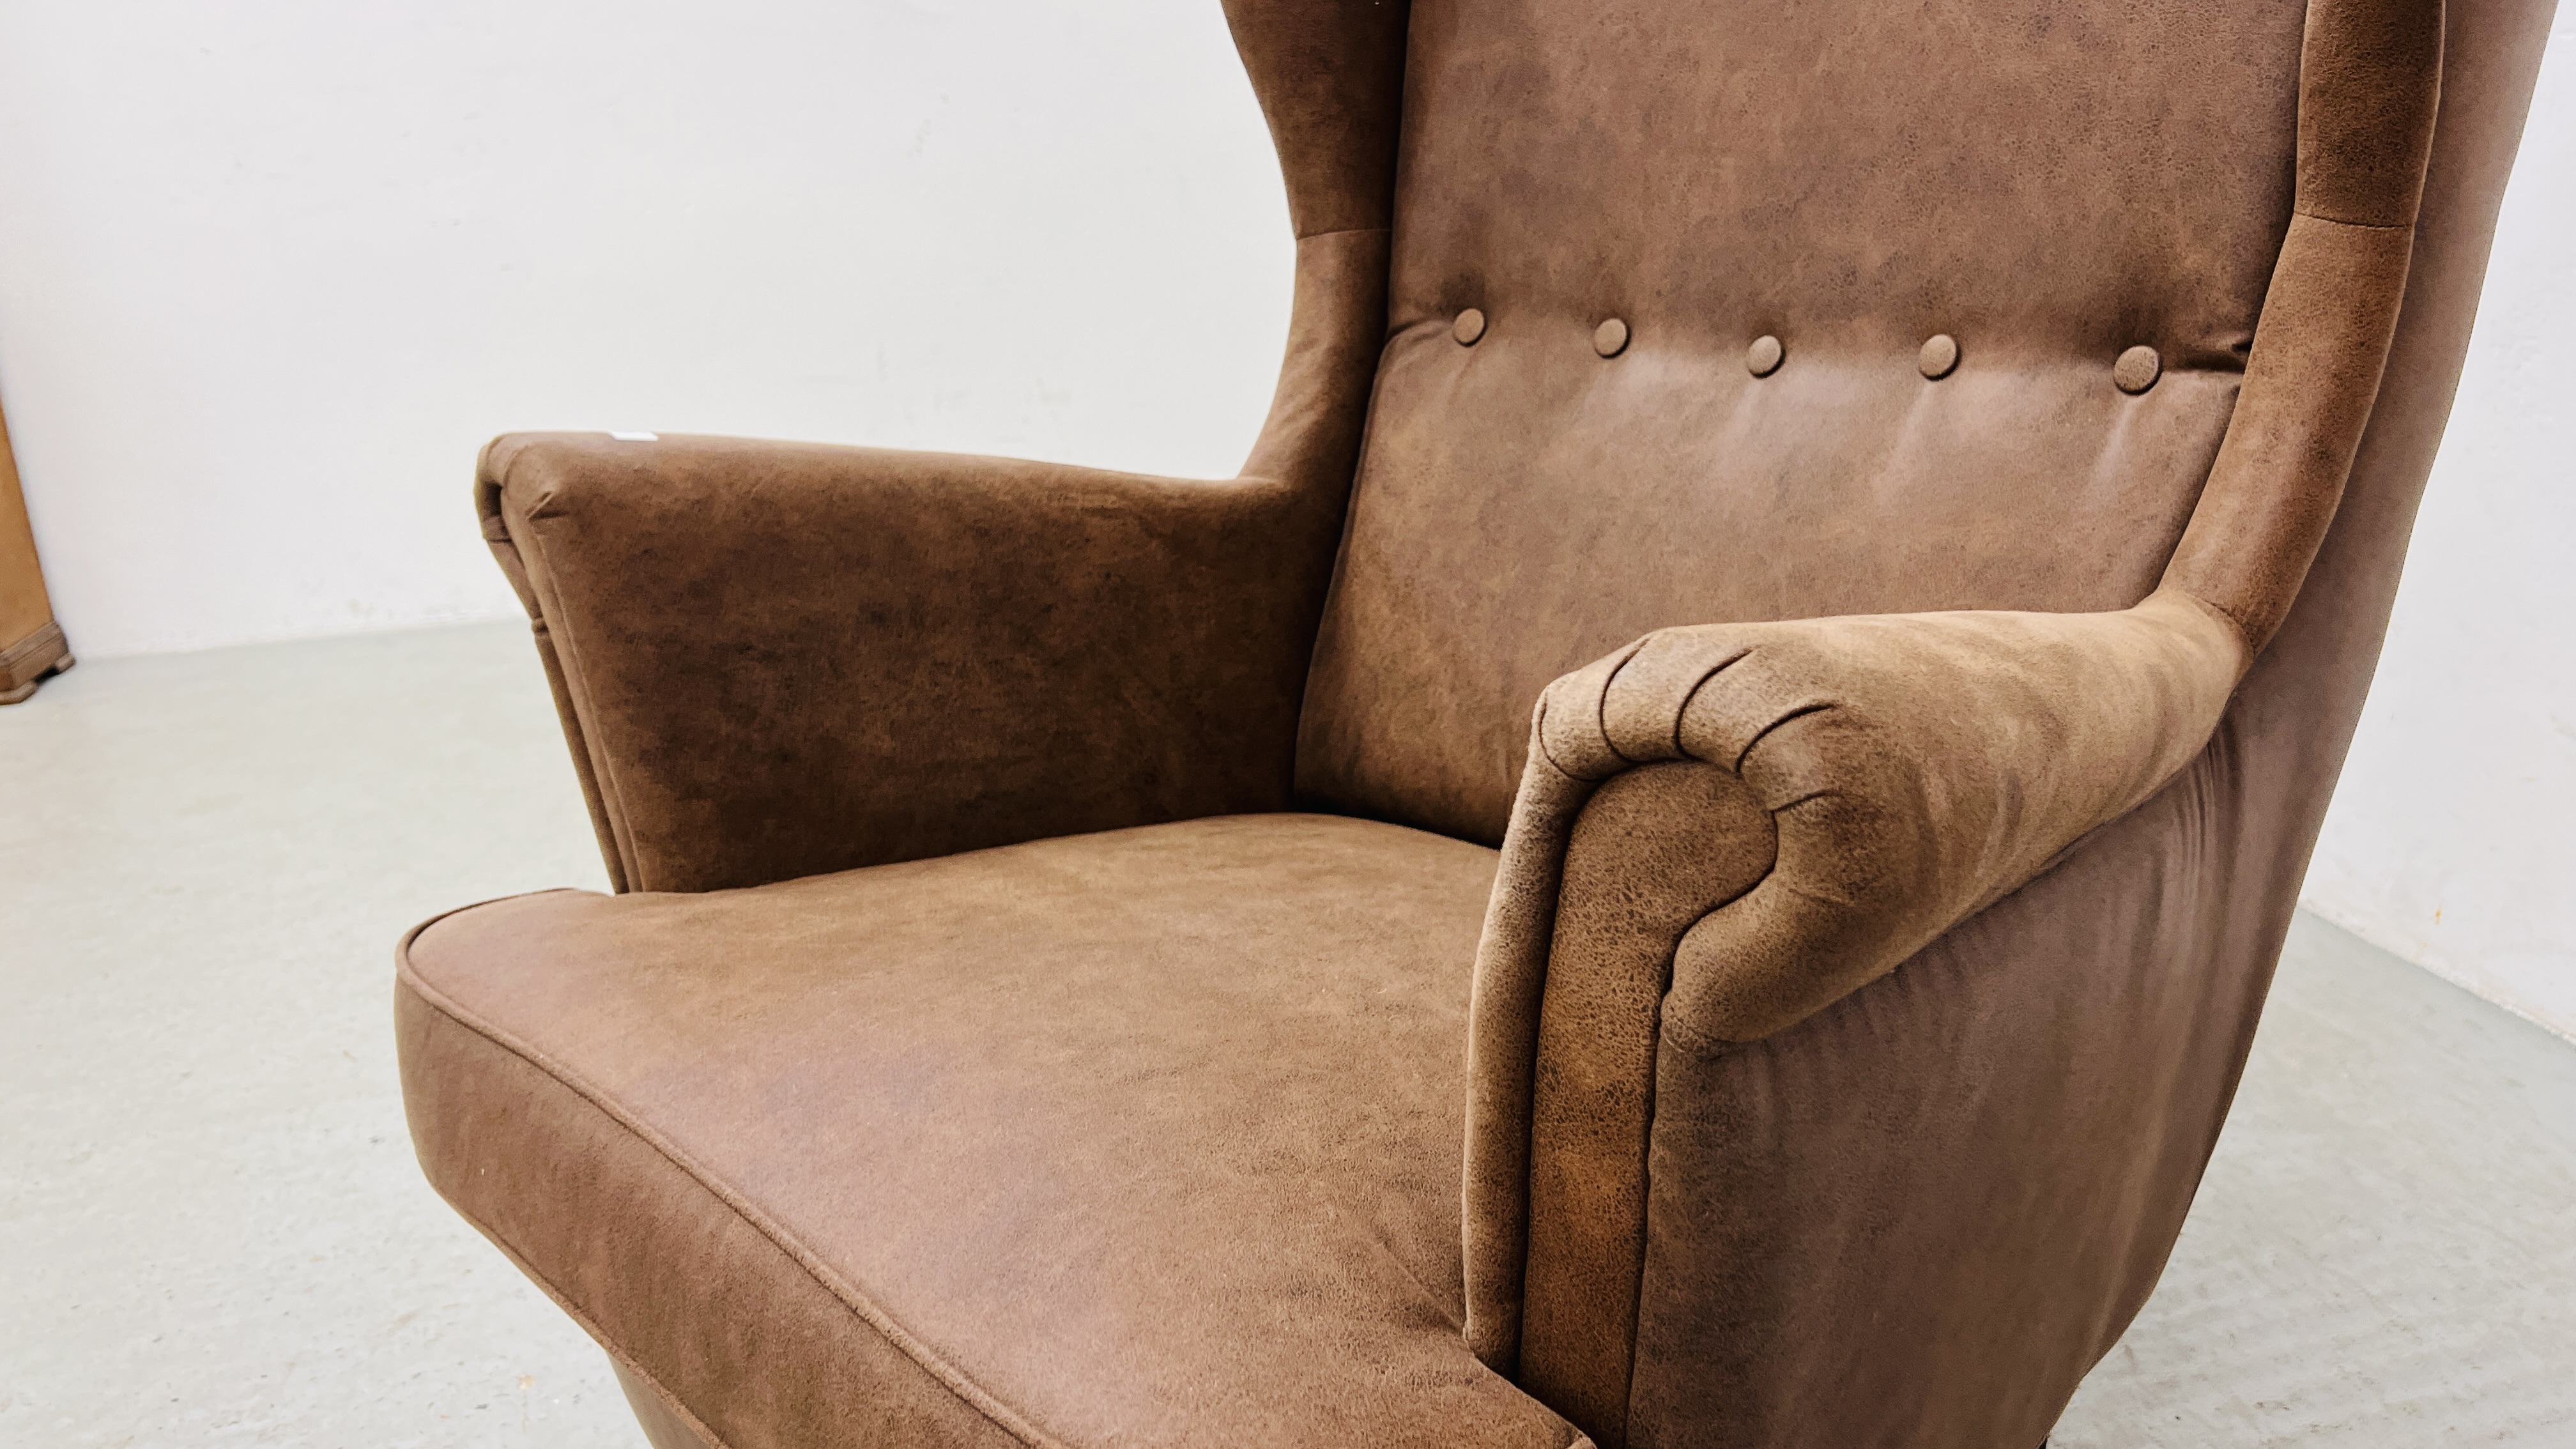 A MODEERN IKEA DESIGNER WINGED ARM CHAIR FAUX BROWN SUEDE UPHOLSTERTY - Image 3 of 7